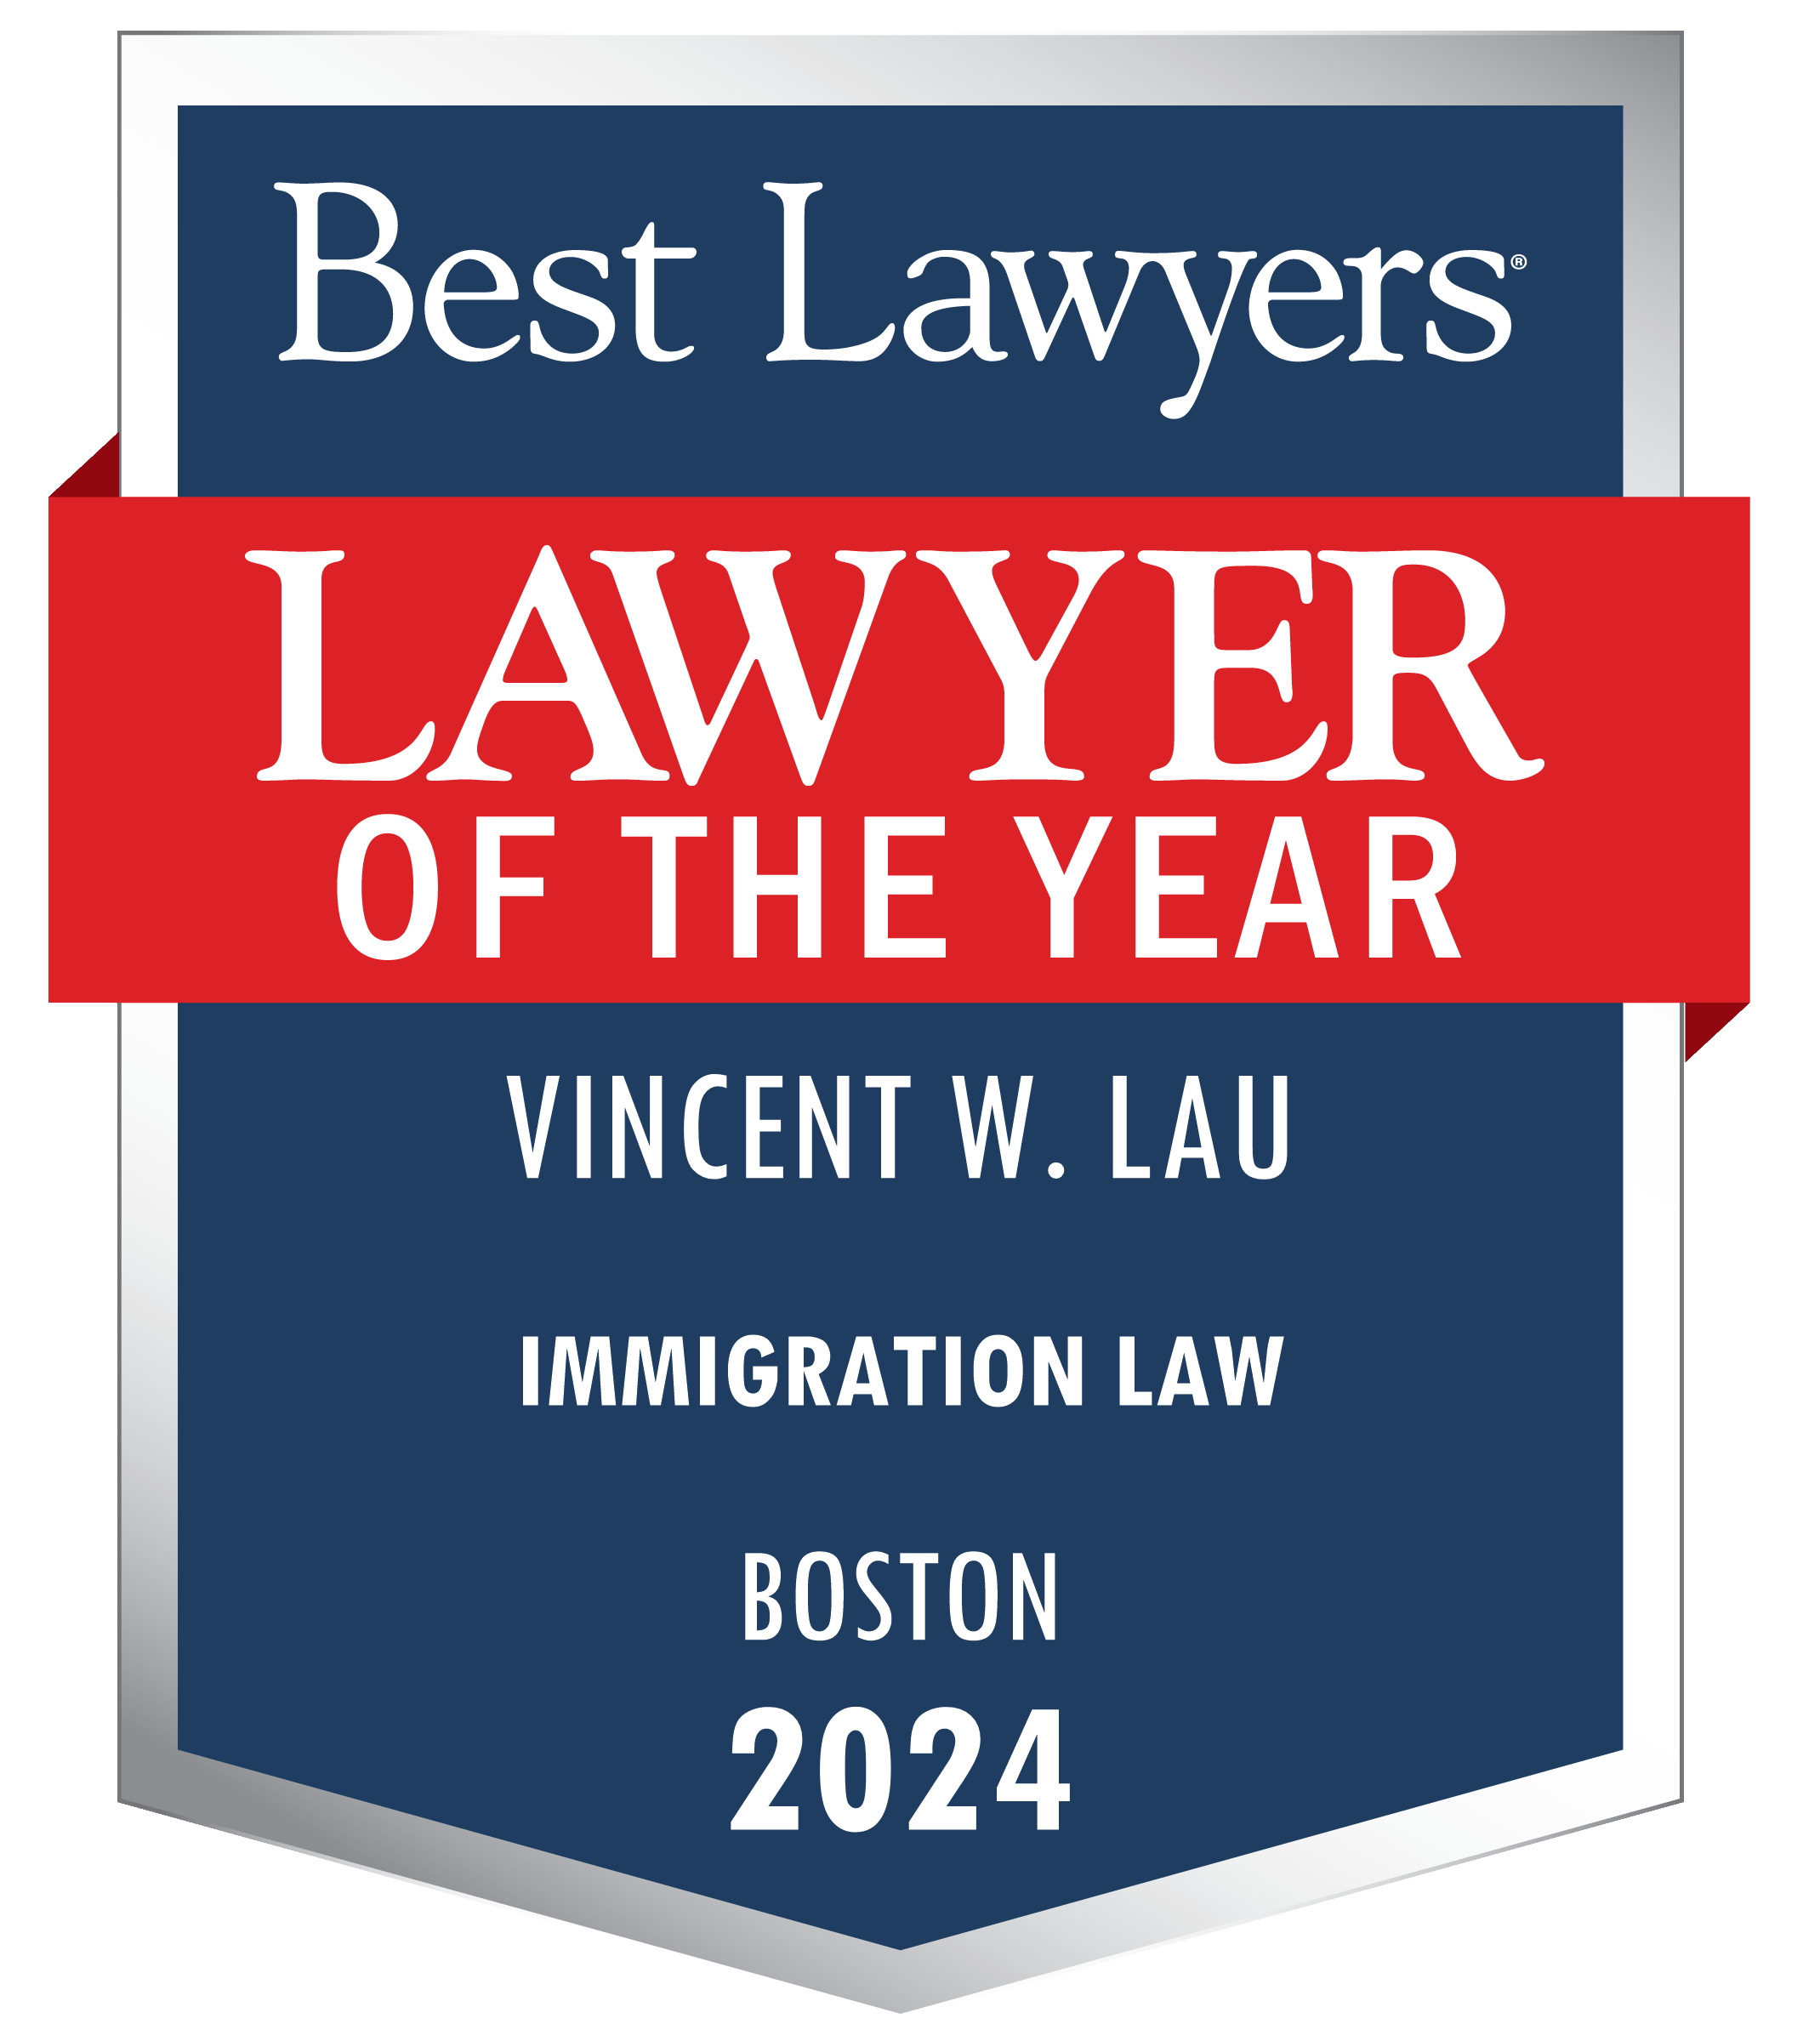 Best Lawyers Lawyer of the Year